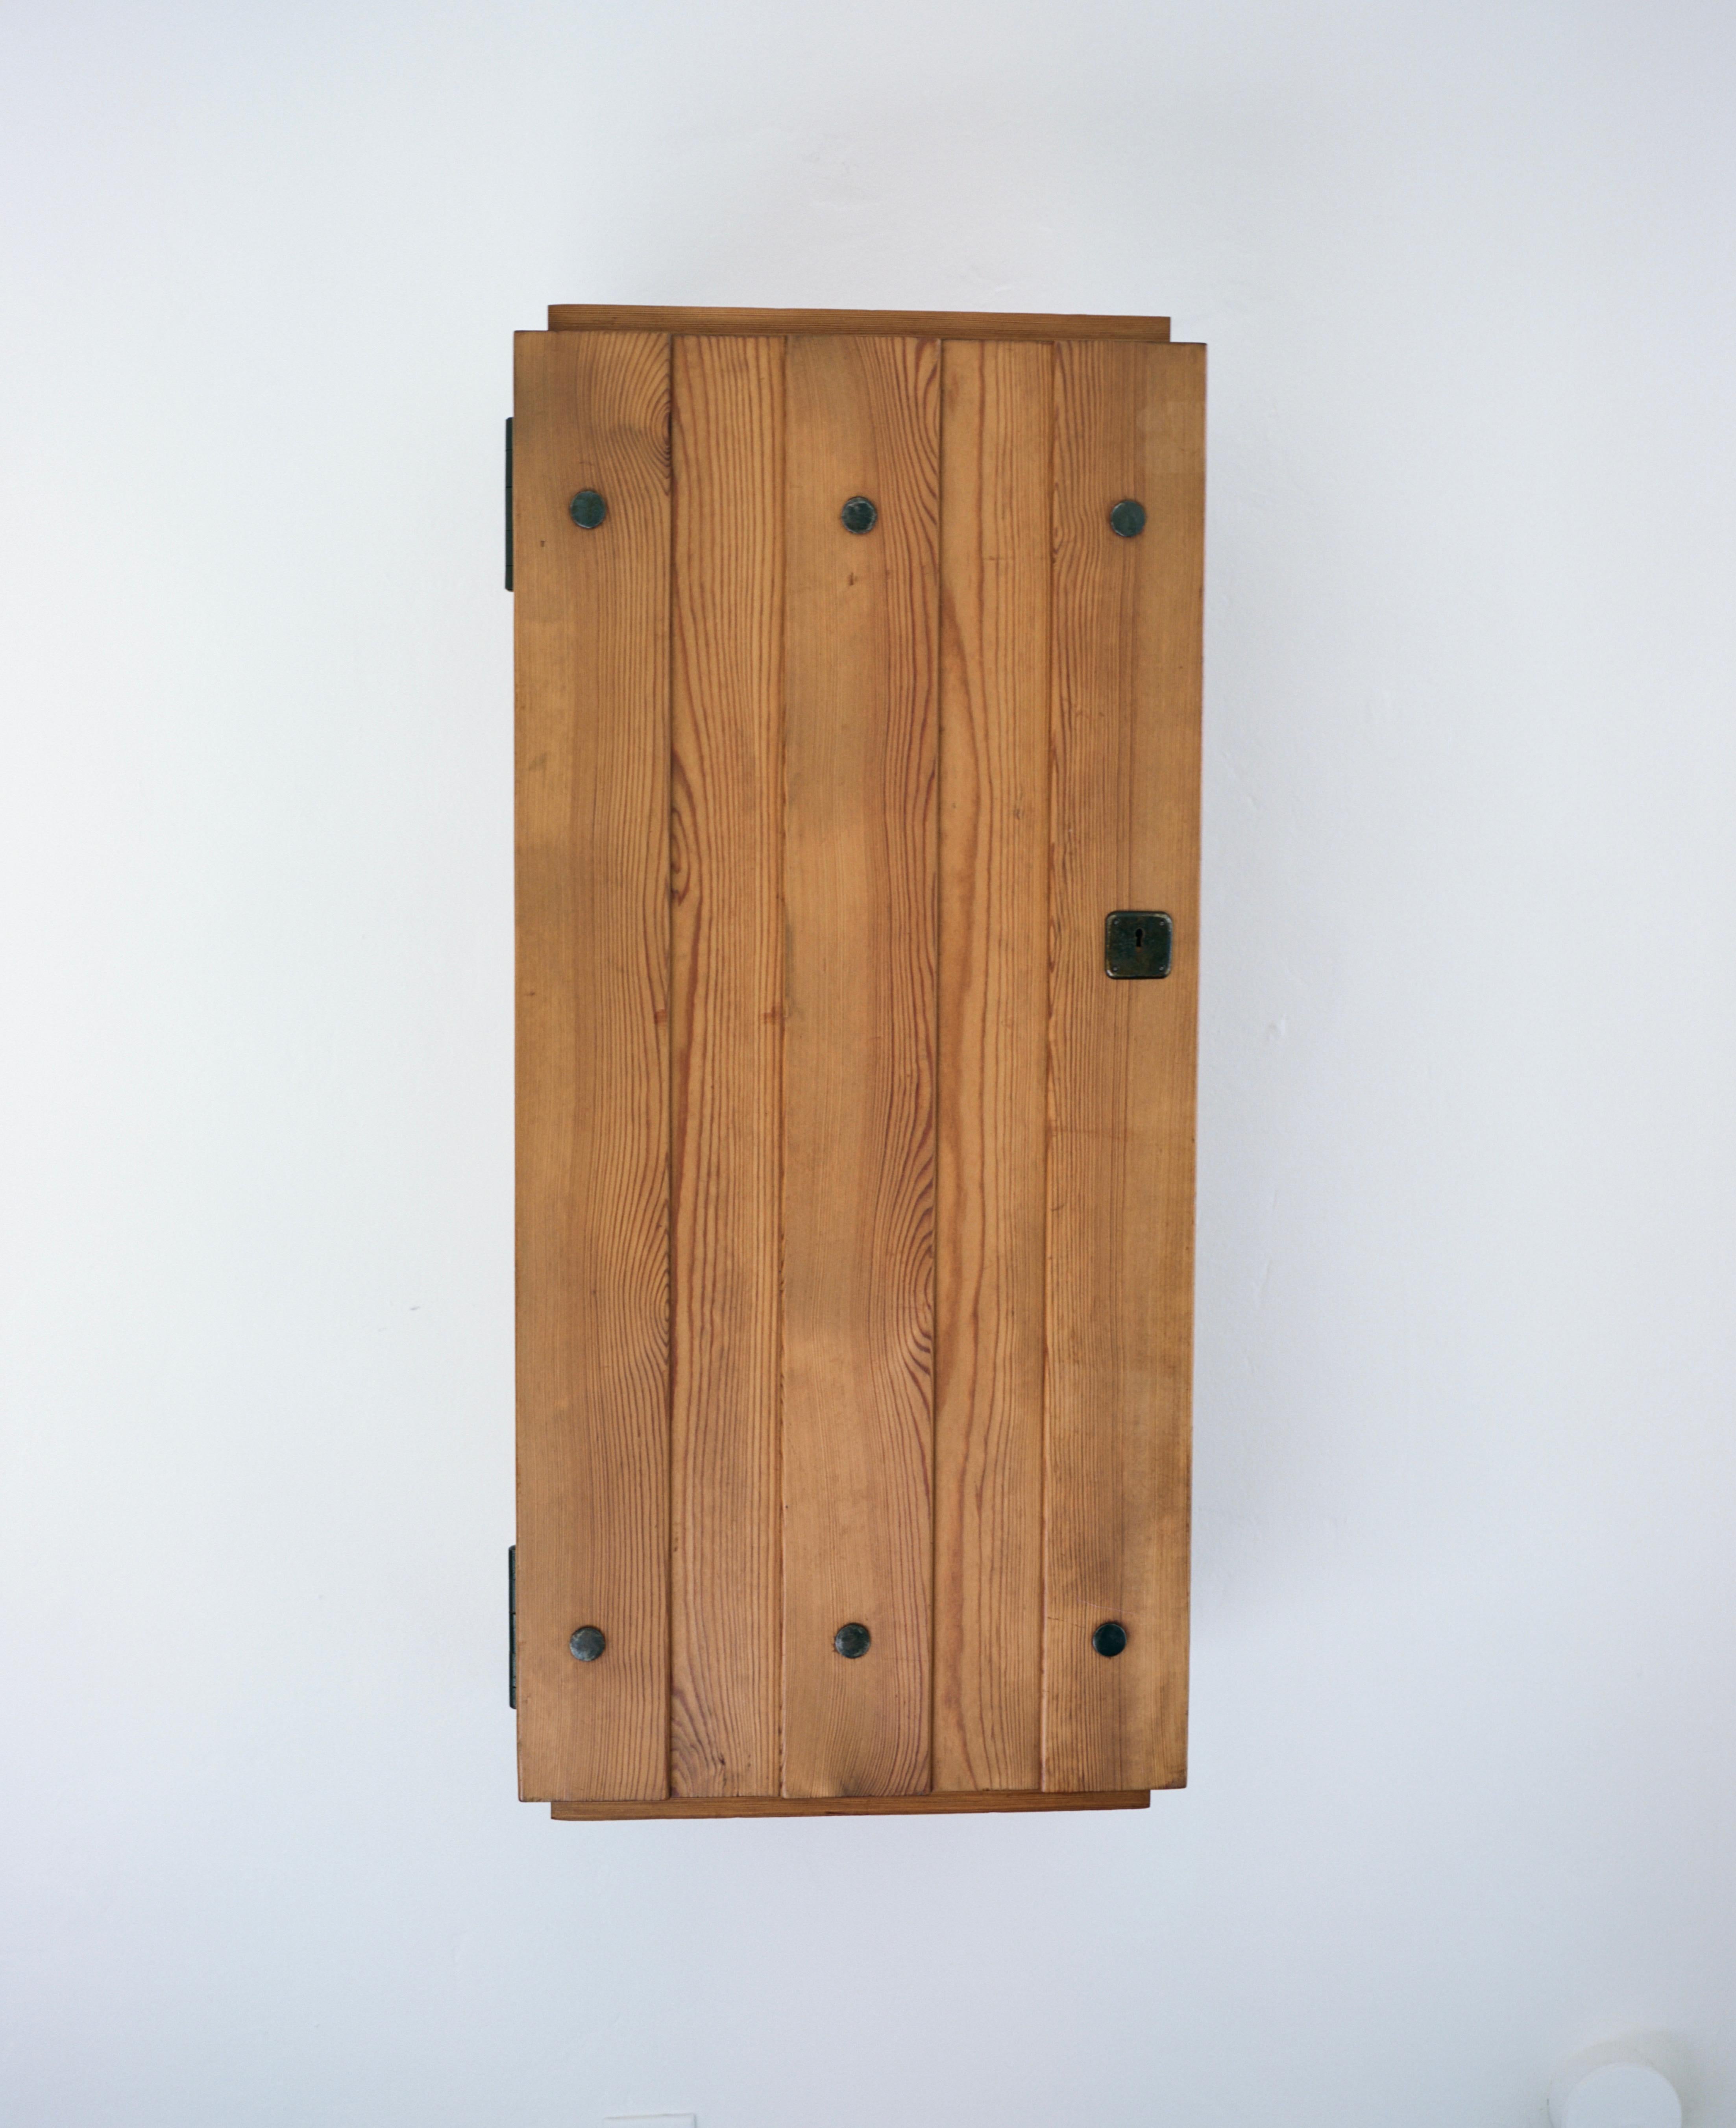 A pine wood wall-hanging cabinet by Axel Einar Hjorth from his “Sportstugemöbler” series designed for Nordiska Kompaniet. 
From 1926-1938, Axel Einar Hjorth was lead furniture designer of Sweden’s Nordiska Kompaniet department store and during that